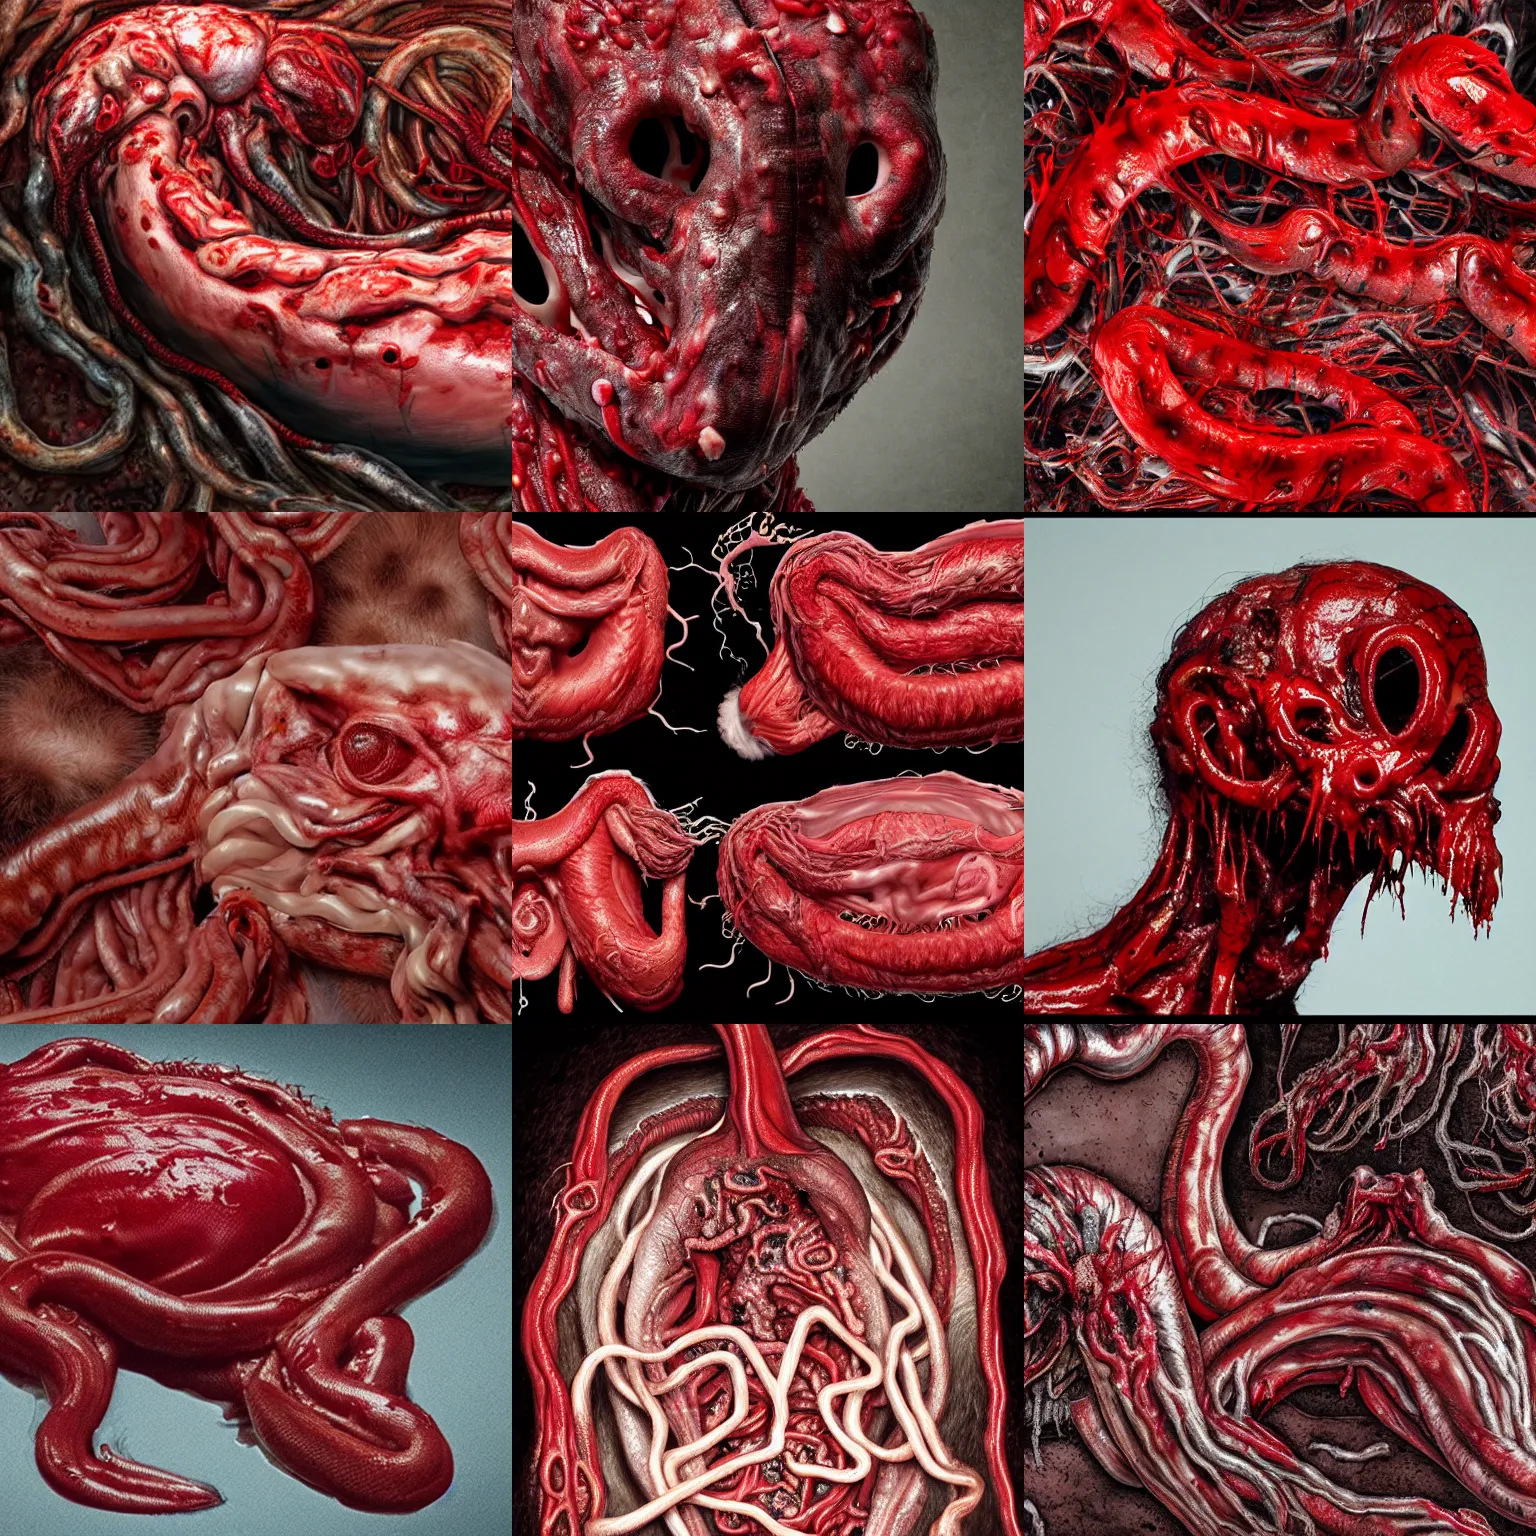 Prompt: a photo of a gory blood-red abomination without shape or form, slimy and reflective, composed of individual animal heads, frightening, twitching and writhing, with smooth and shiny intestines slithering out of the central mass, body horror with remnants of fur and hairy mold, blood oozing from every body crevice, ultra-detailed, ultra-realistic, color